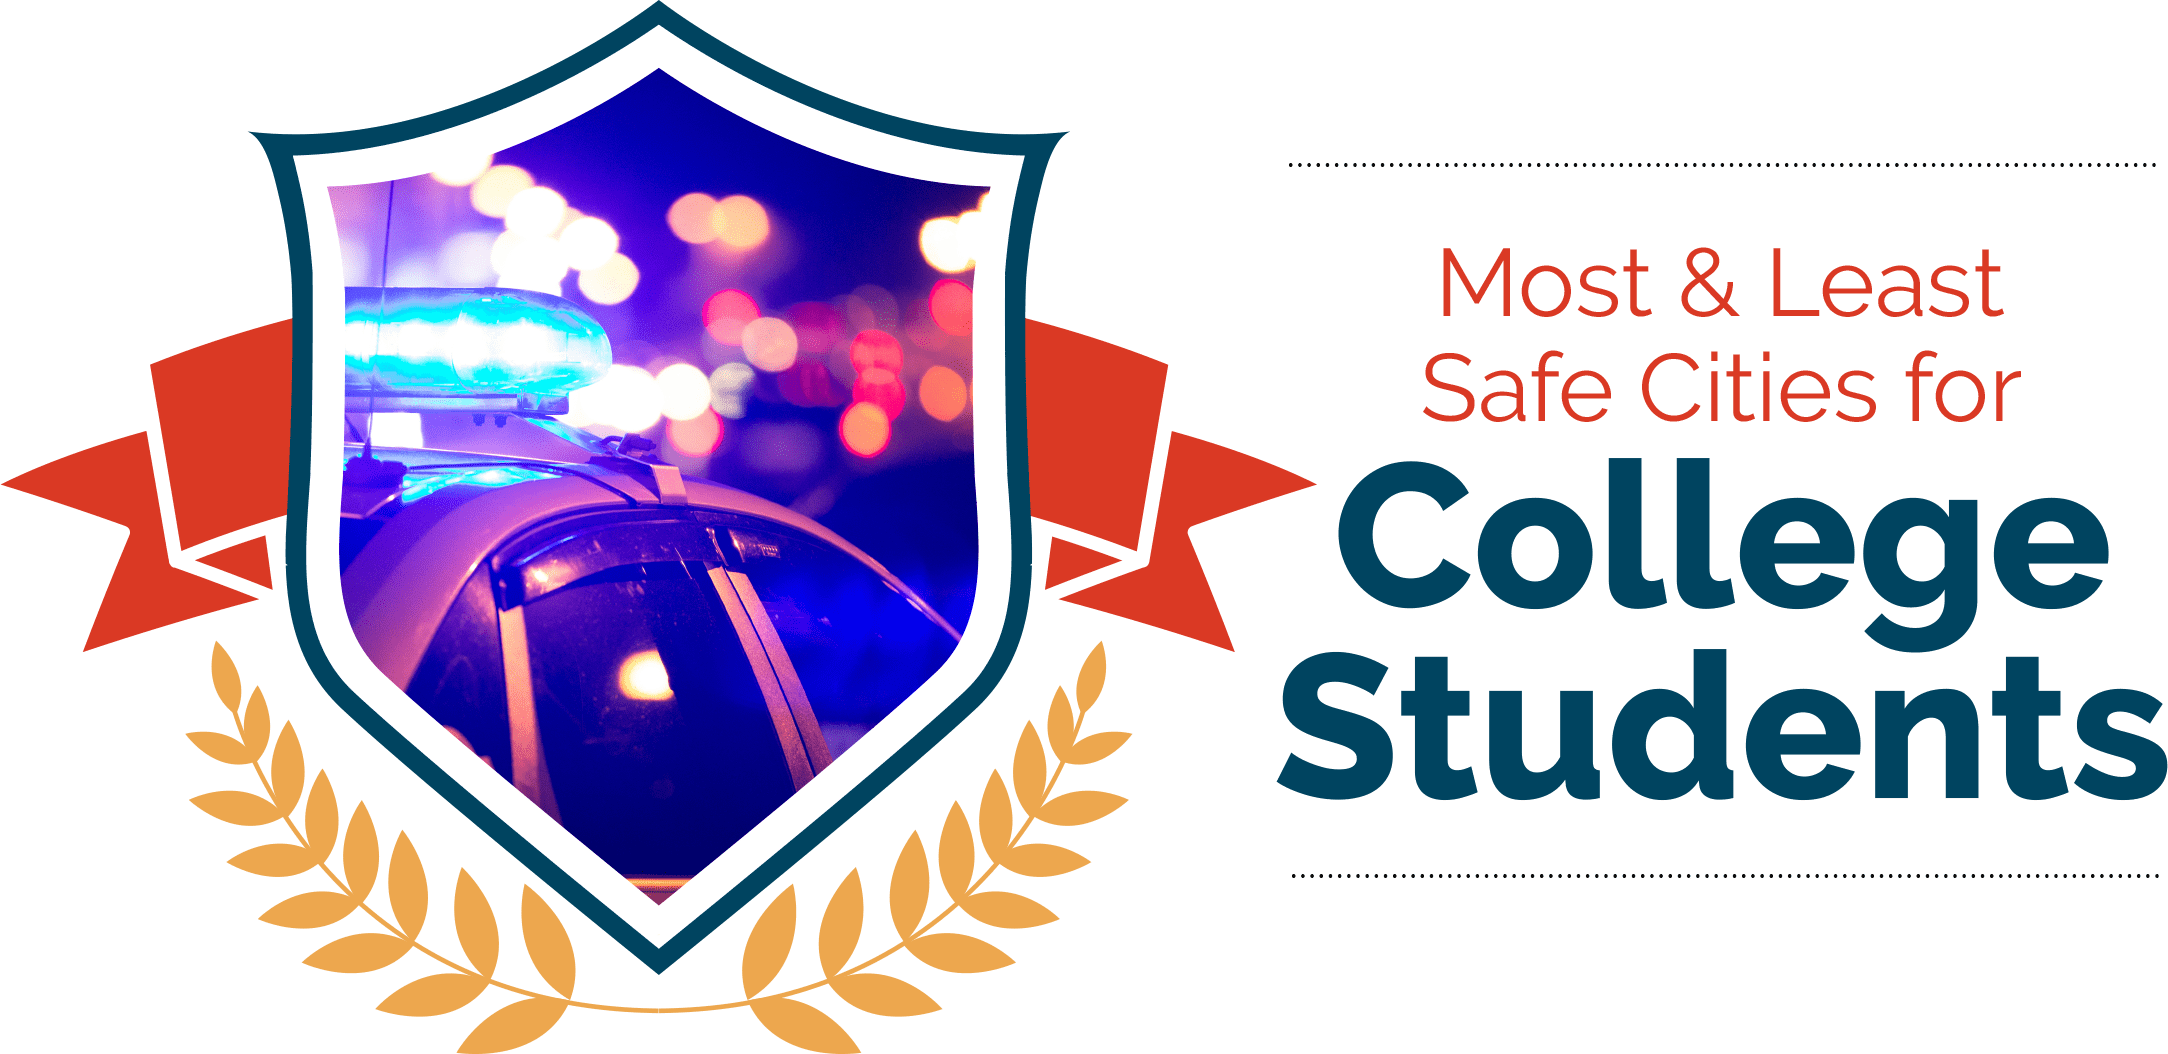 Most & Least Safe Cities for College Students